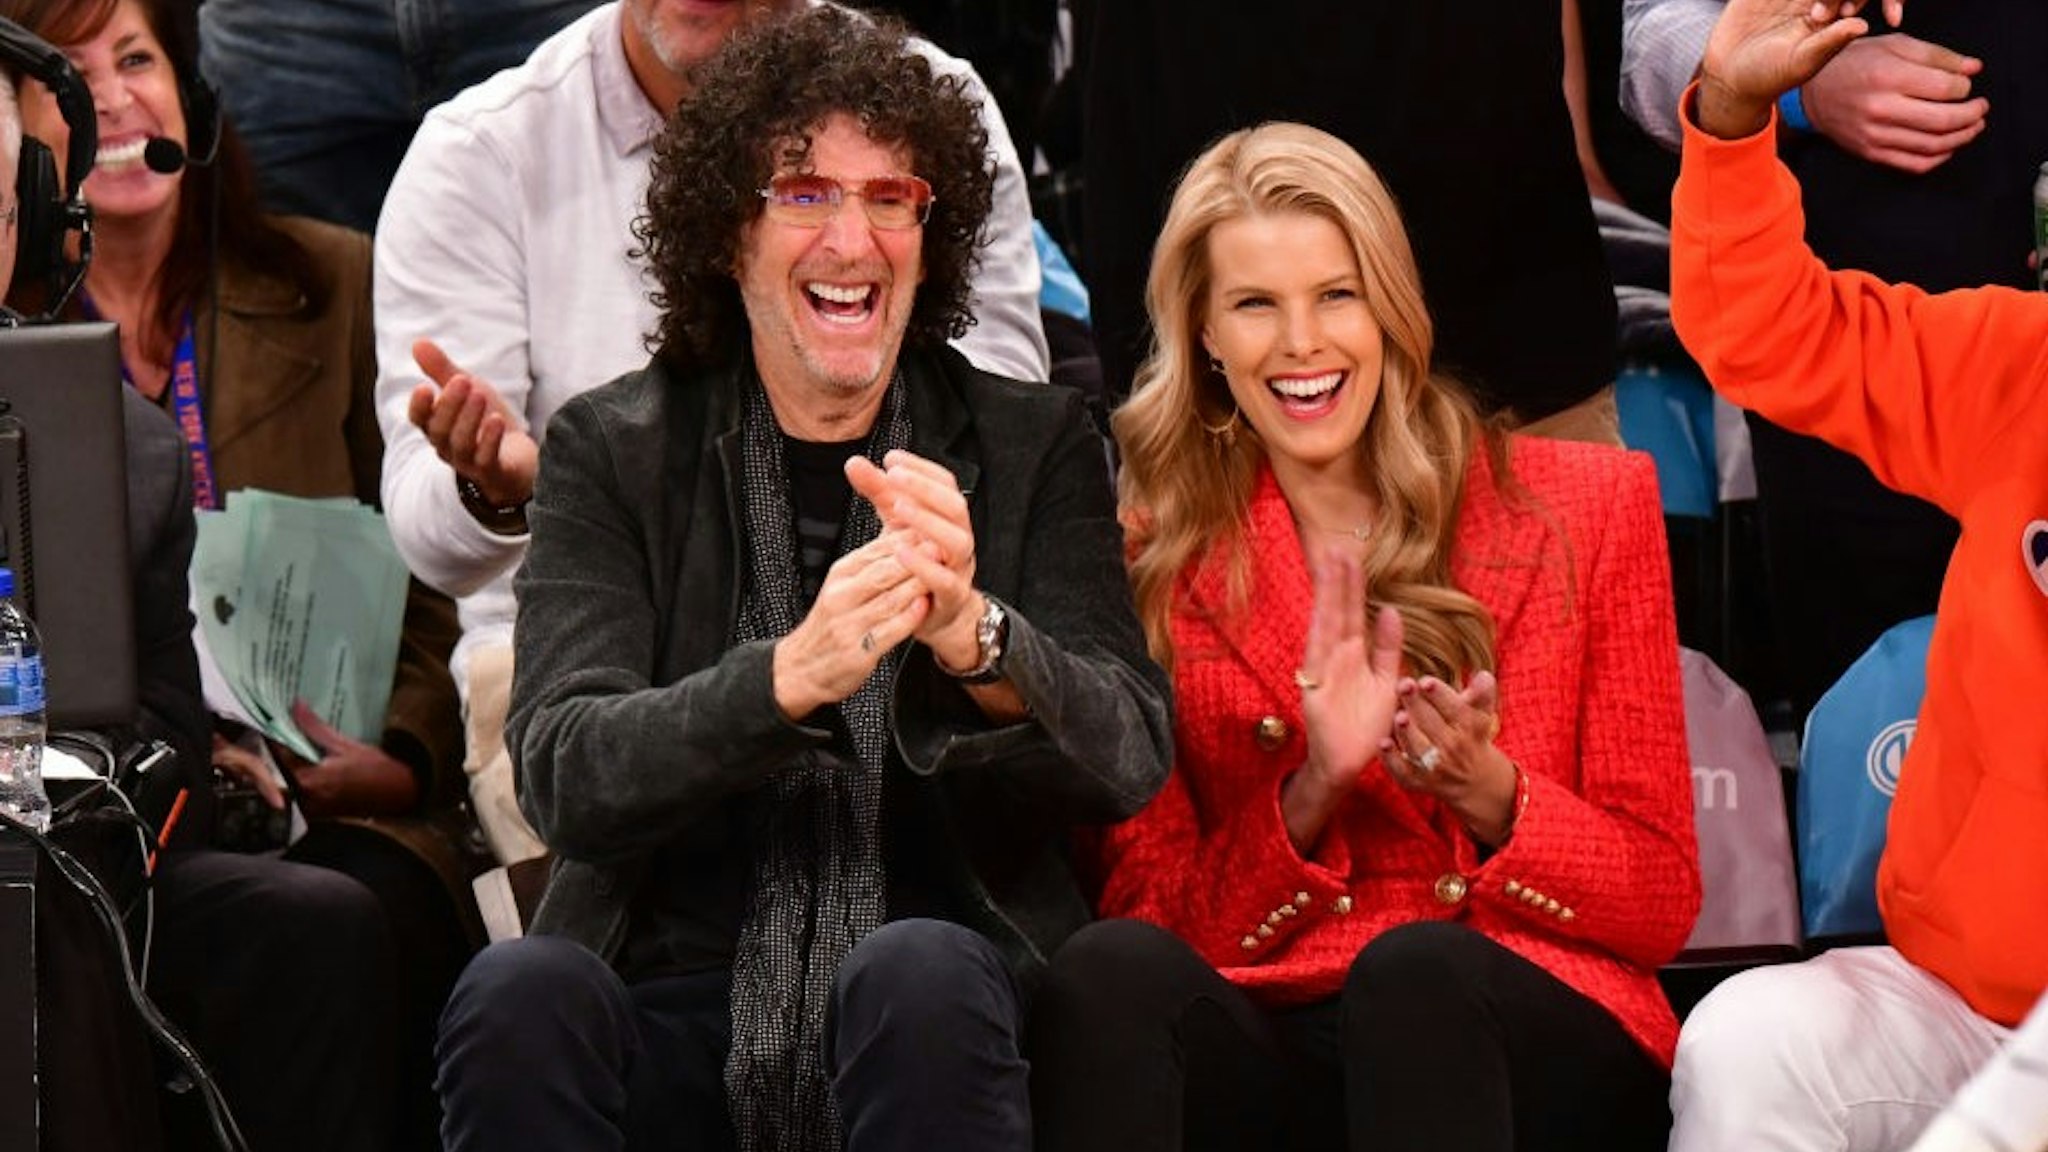 Howard Stern and Beth Ostrosky Stern attend the New York Knicks vs Atlanta Hawks game at Madison Square Garden on October 17, 2018 in New York City. (Photo by J